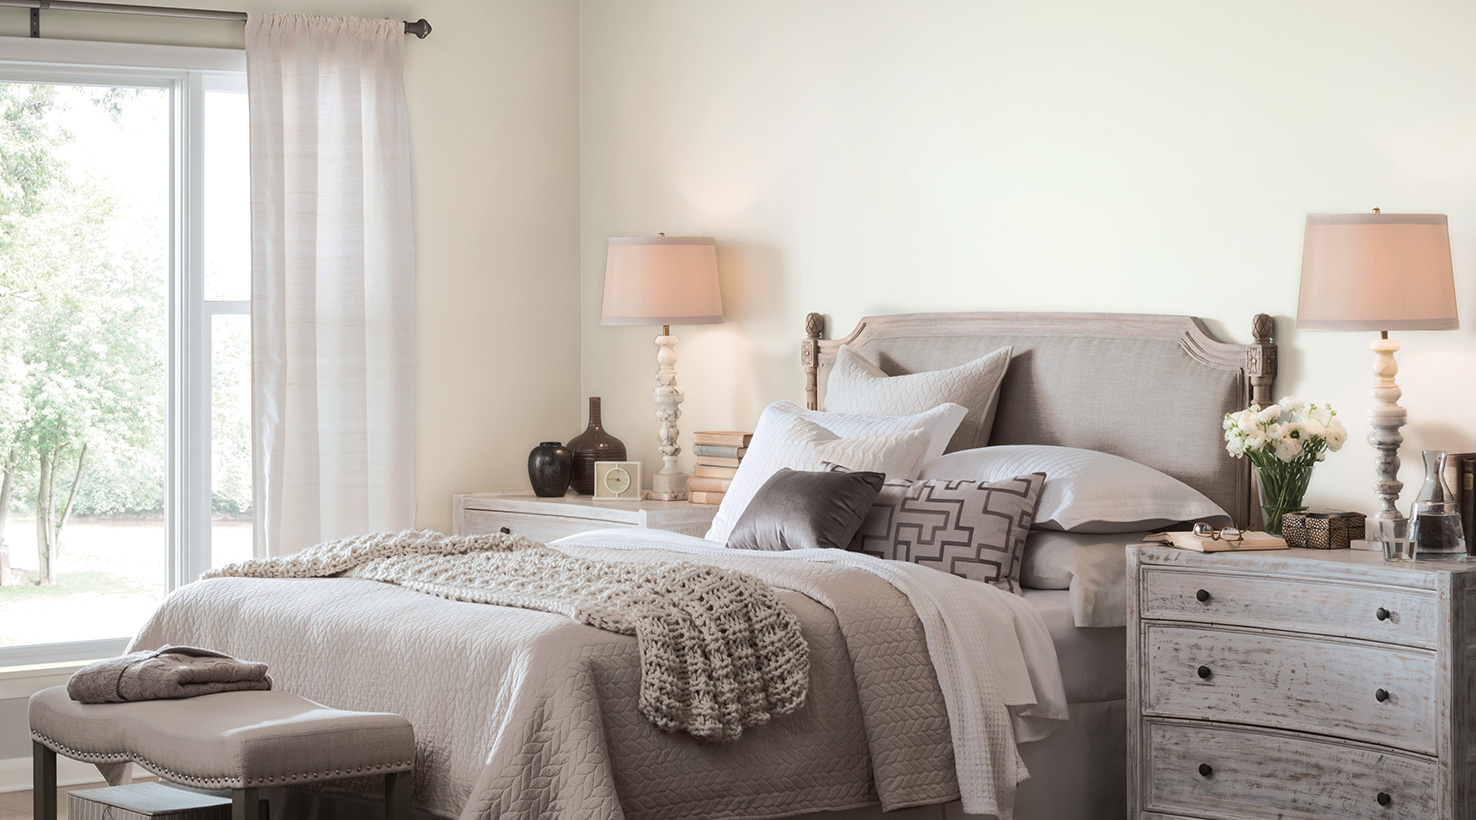 The Best Paint Colors For A Restful Sleep bedroom with white walls